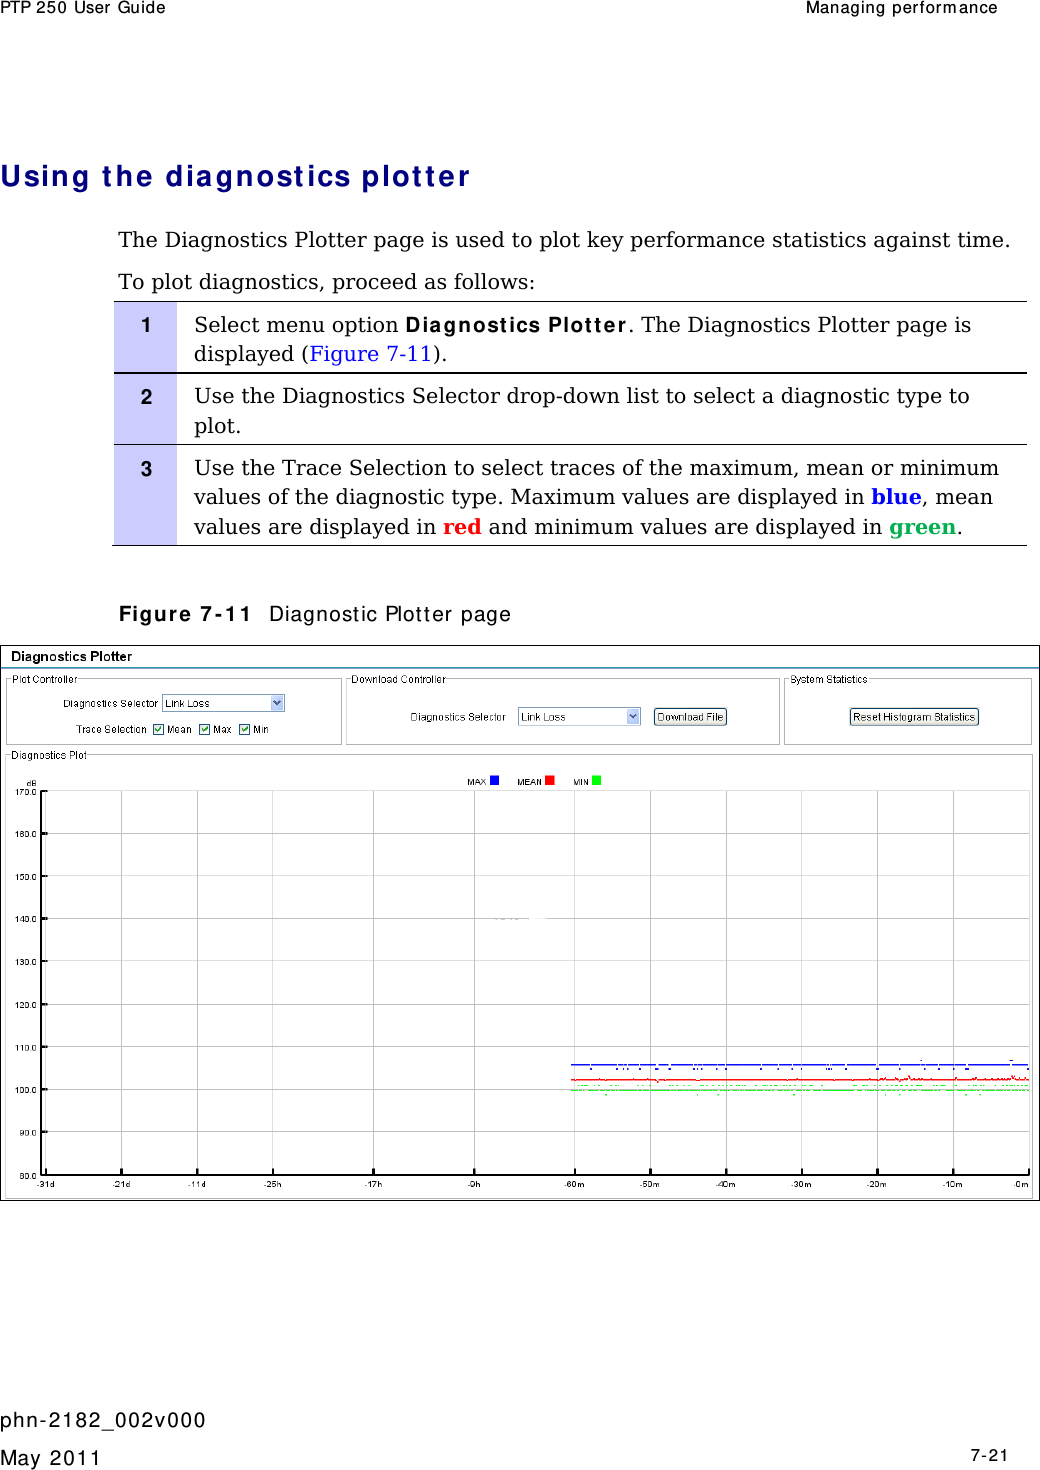 PTP 250 User Guide  Managing perform ance   phn- 2182_002v000   May 2011   7-21  Using t he dia gnost ics plot t er The Diagnostics Plotter page is used to plot key performance statistics against time.  To plot diagnostics, proceed as follows: 1   Select menu option D iagnostics Plotter. The Diagnostics Plotter page is displayed (Figure 7-11). 2   Use the Diagnostics Selector drop-down list to select a diagnostic type to plot. 3   Use the Trace Selection to select traces of the maximum, mean or minimum values of the diagnostic type. Maximum values are displayed in blue, mean values are displayed in red and minimum values are displayed in green.   Figure 7 - 1 1   Diagnost ic Plott er page    